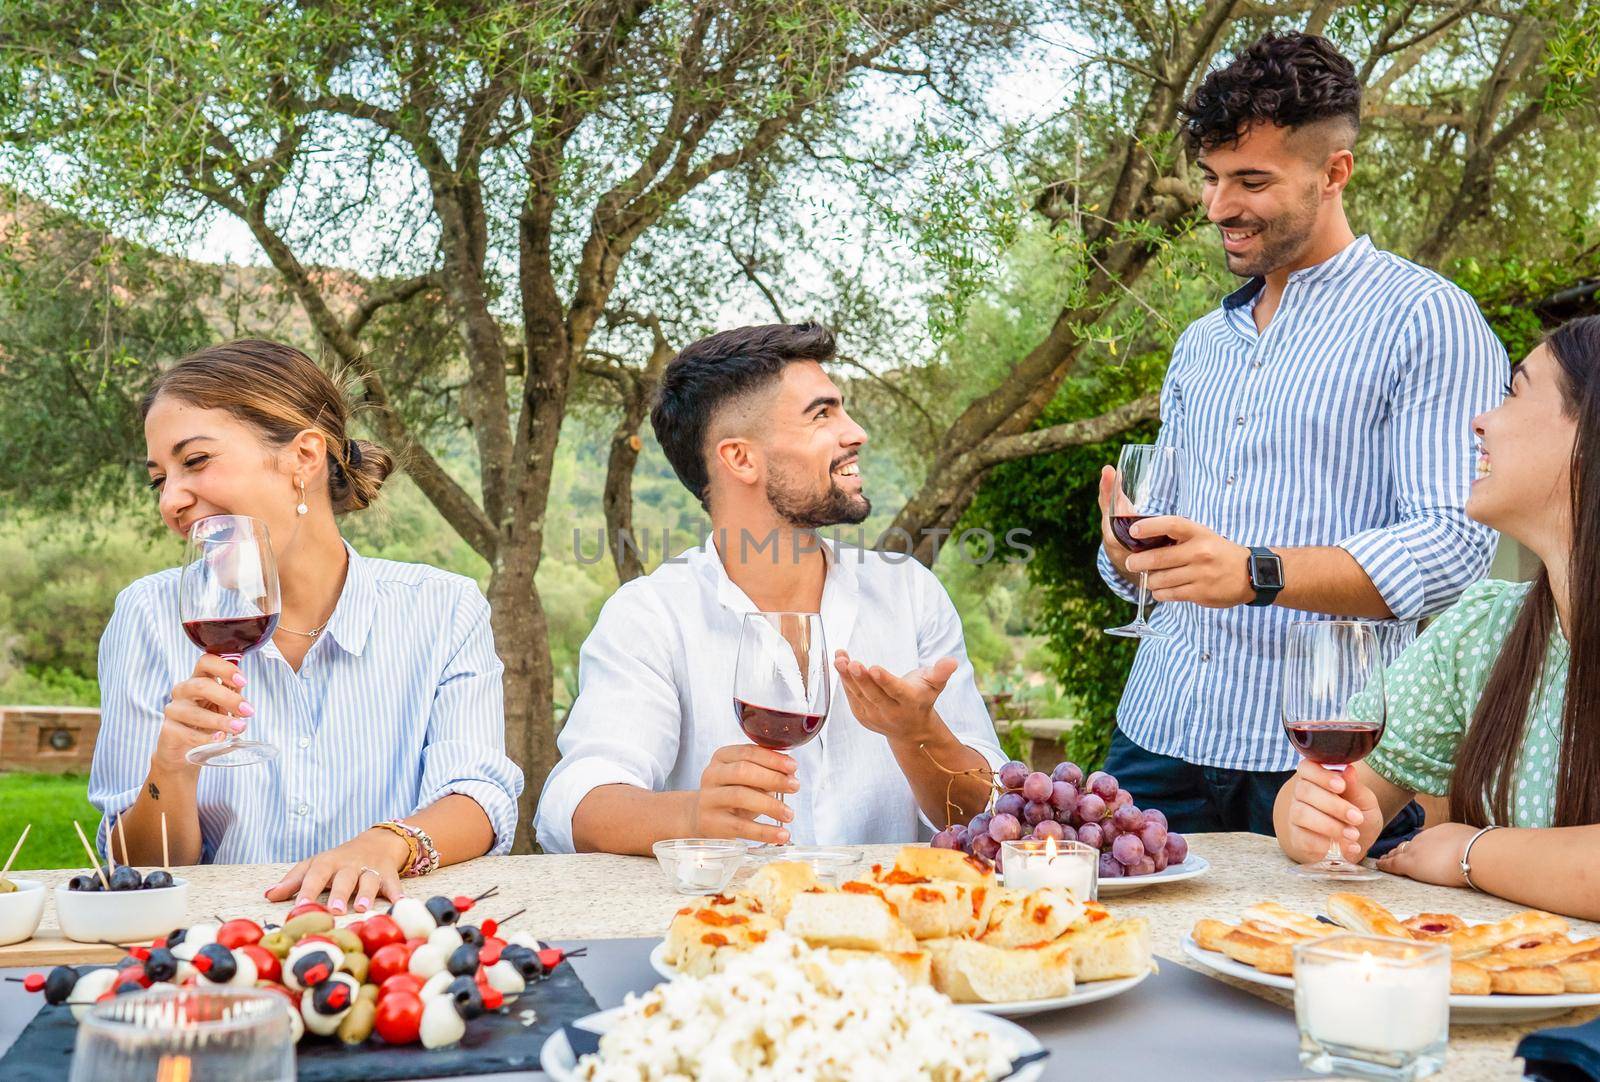 Typical italian celebration for grape harvest in country size house. Group of young friends gathering at table laden with snacks, pizza, tomatoes and mozzarella skewers holding glasses of red wine by robbyfontanesi